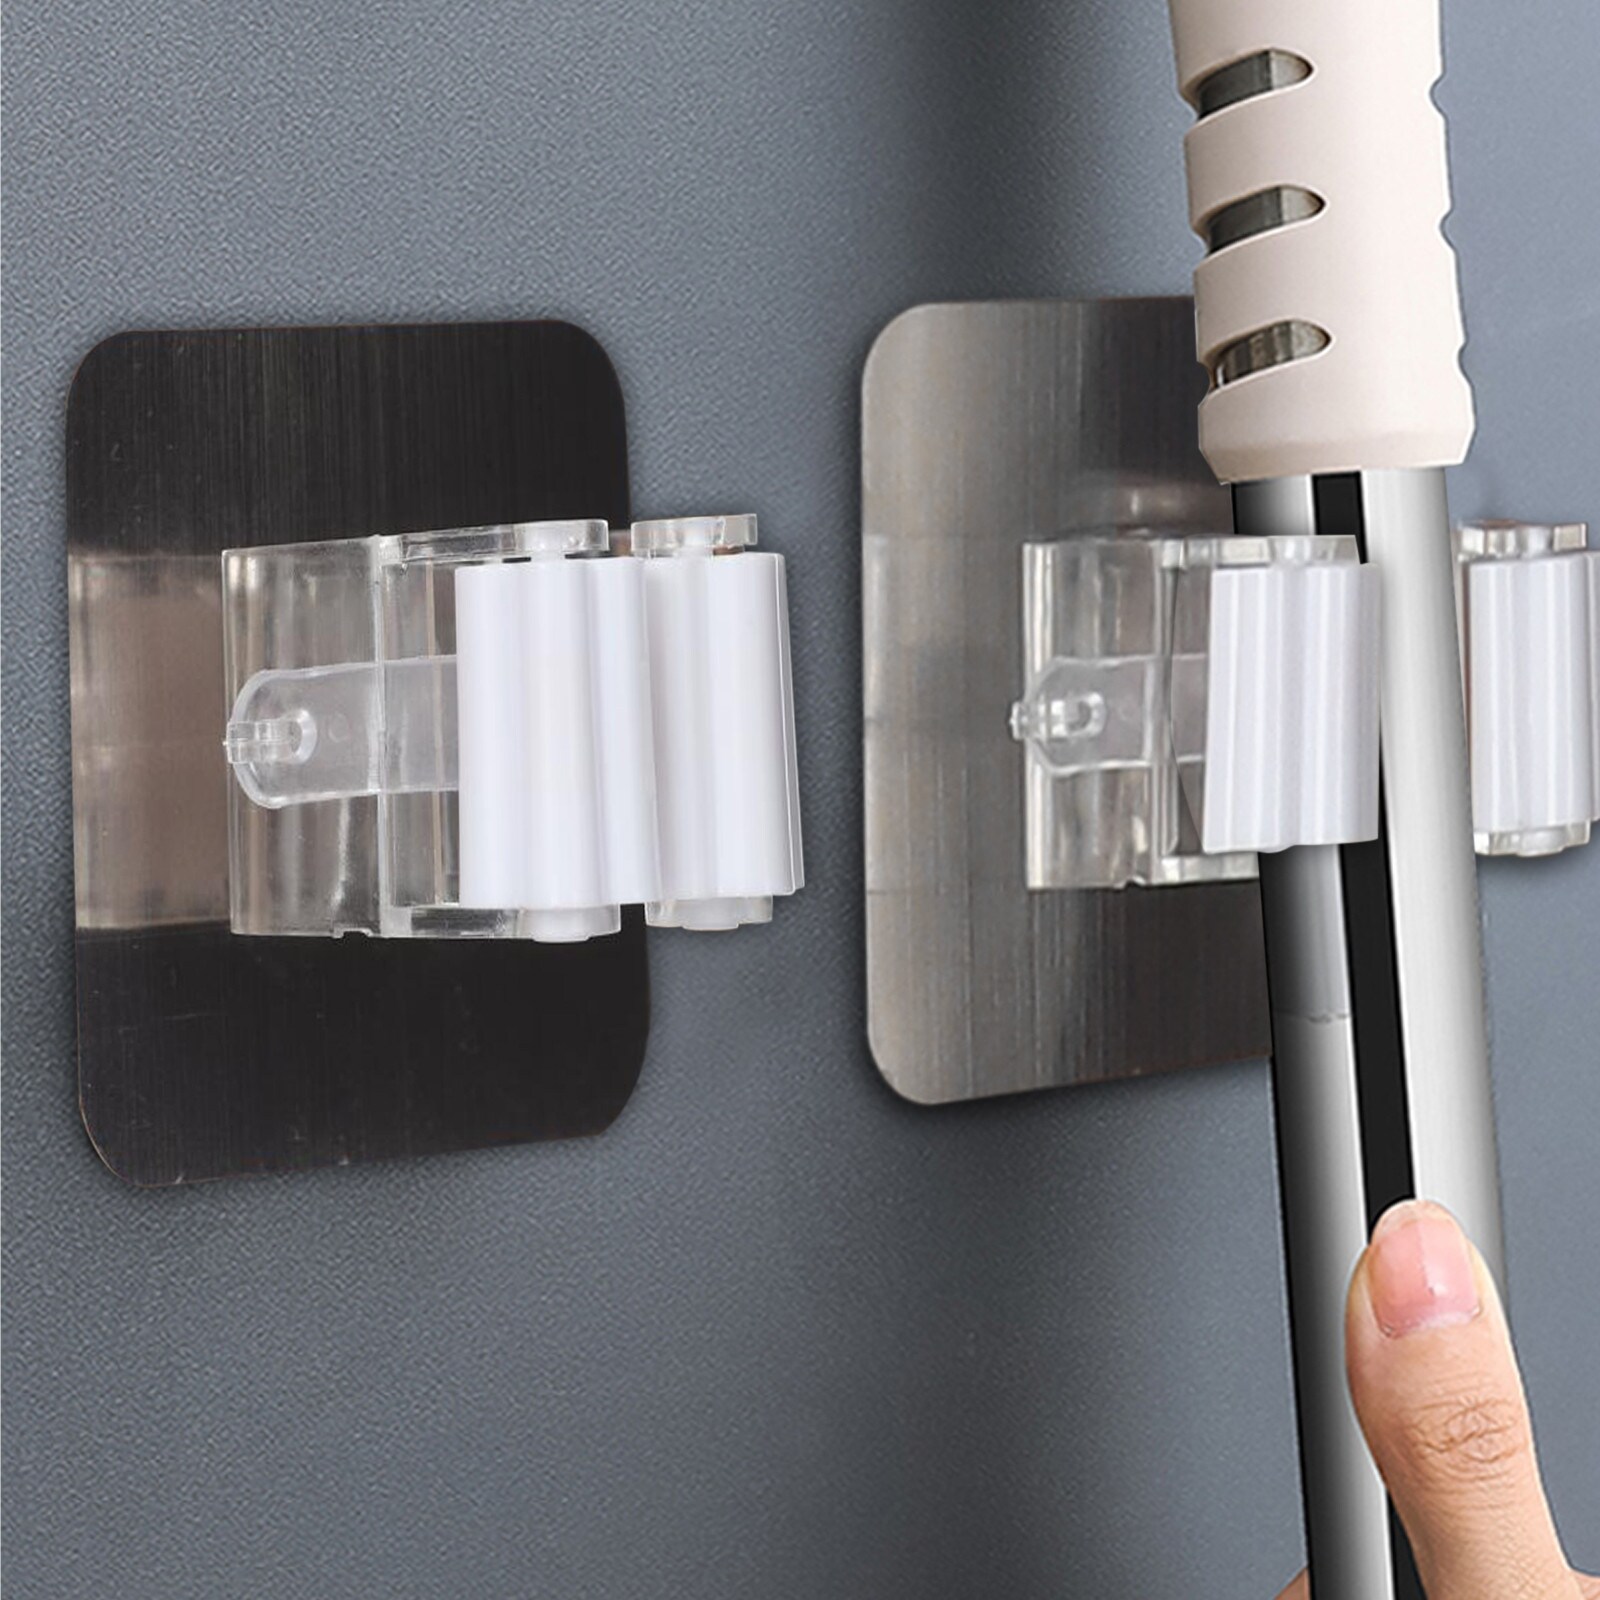 https://ak1.ostkcdn.com/images/products/is/images/direct/69ca7d32f345ffb48429ad0206265e330dd793d0/Wall-Mounted-Mop-Organizer-Holder-Brush-Broom-Hanger-Storage-Rack-Kitchen-Tool.jpg